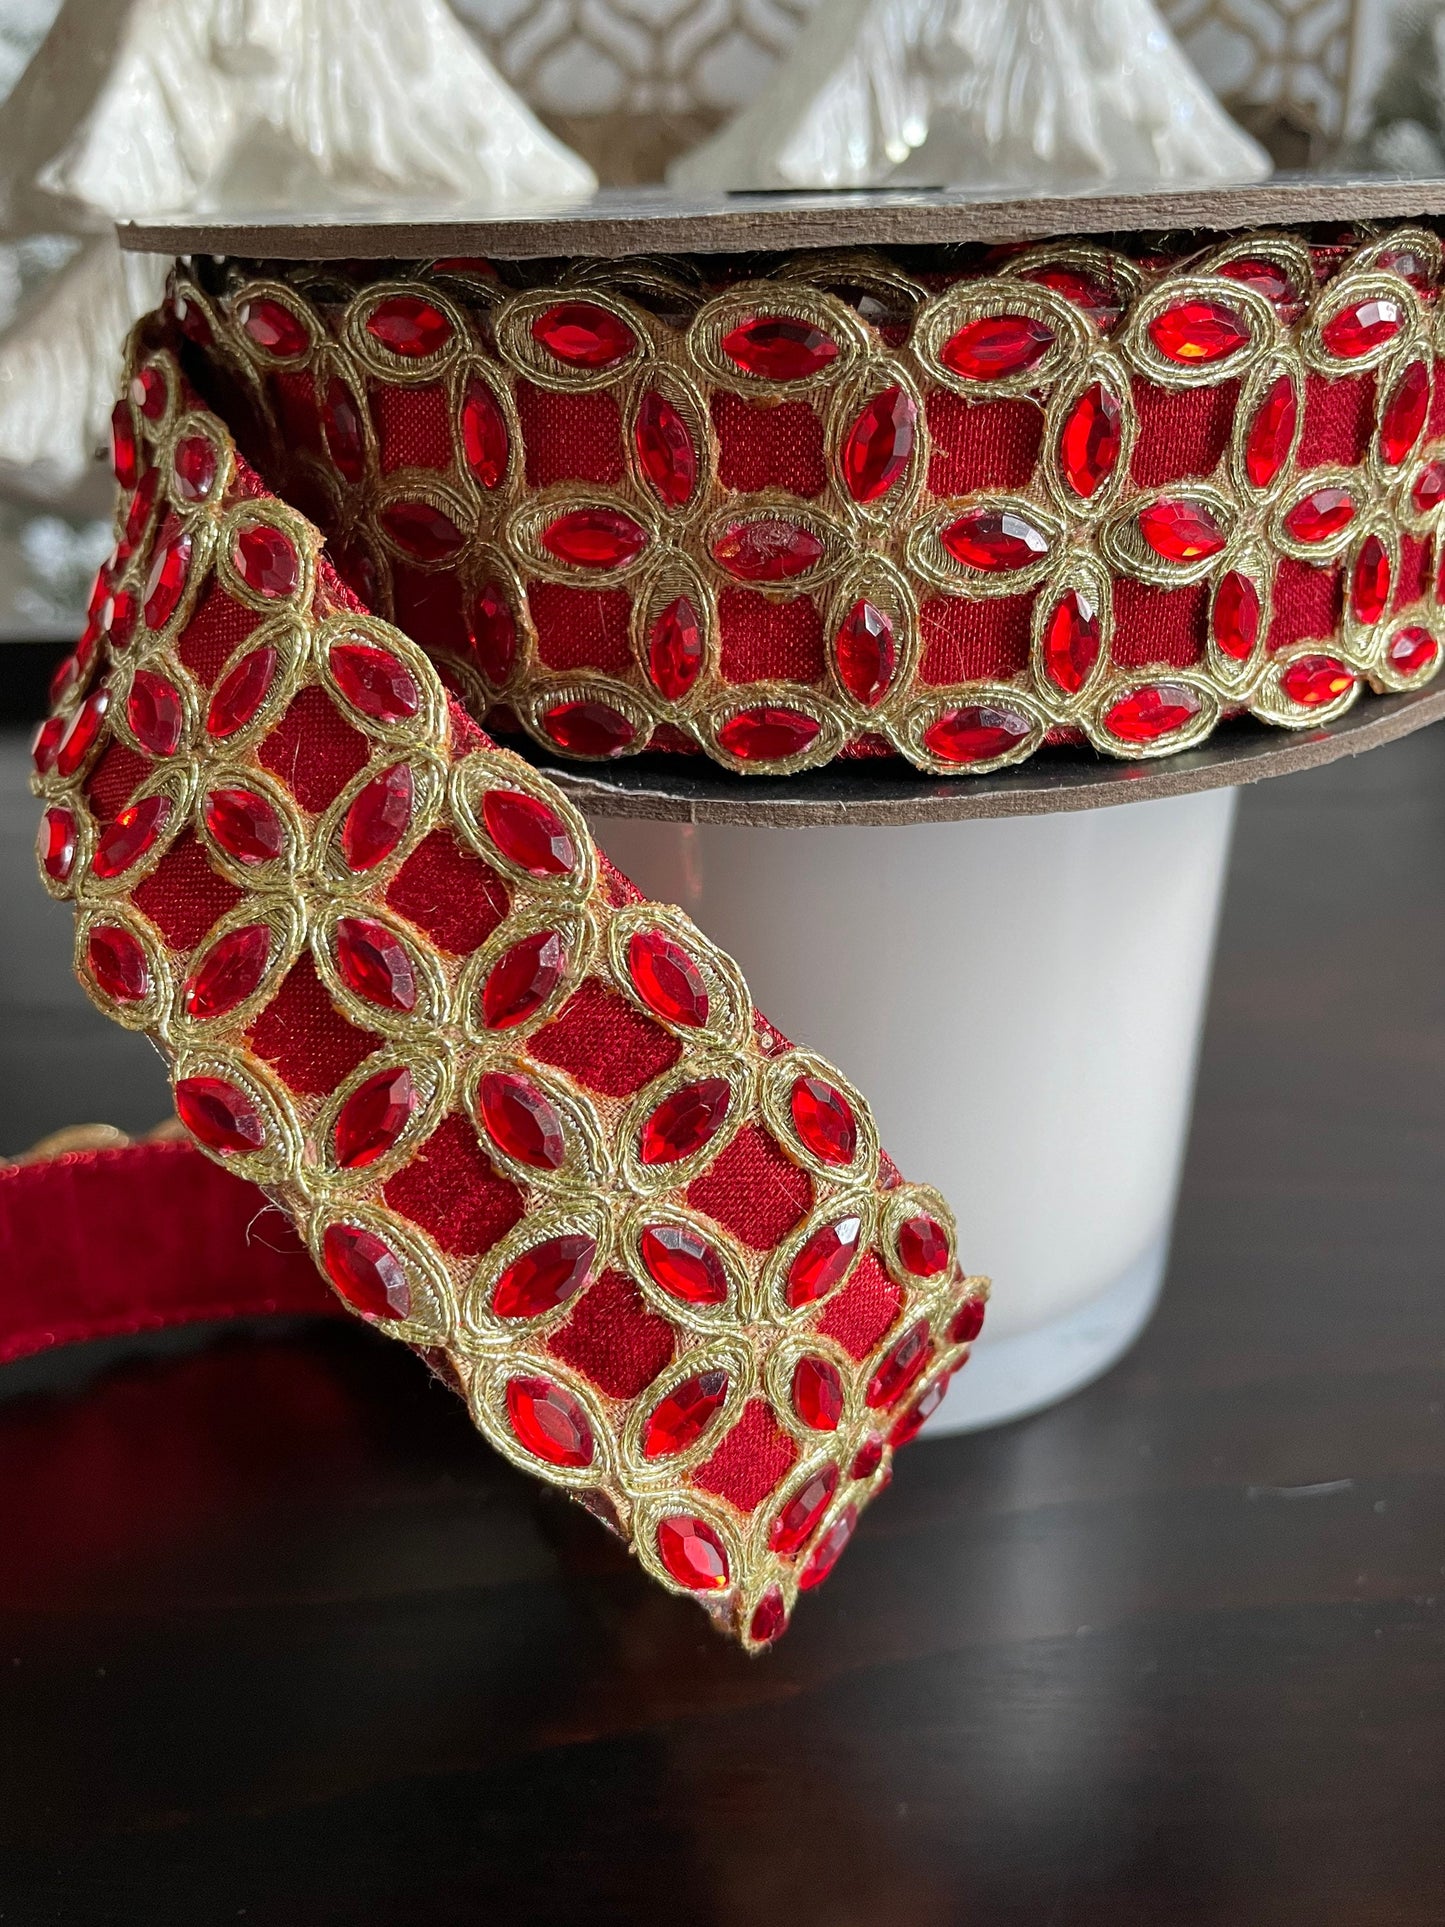 Designer red ribbon with jewels. 1.5” x 10 yards.*